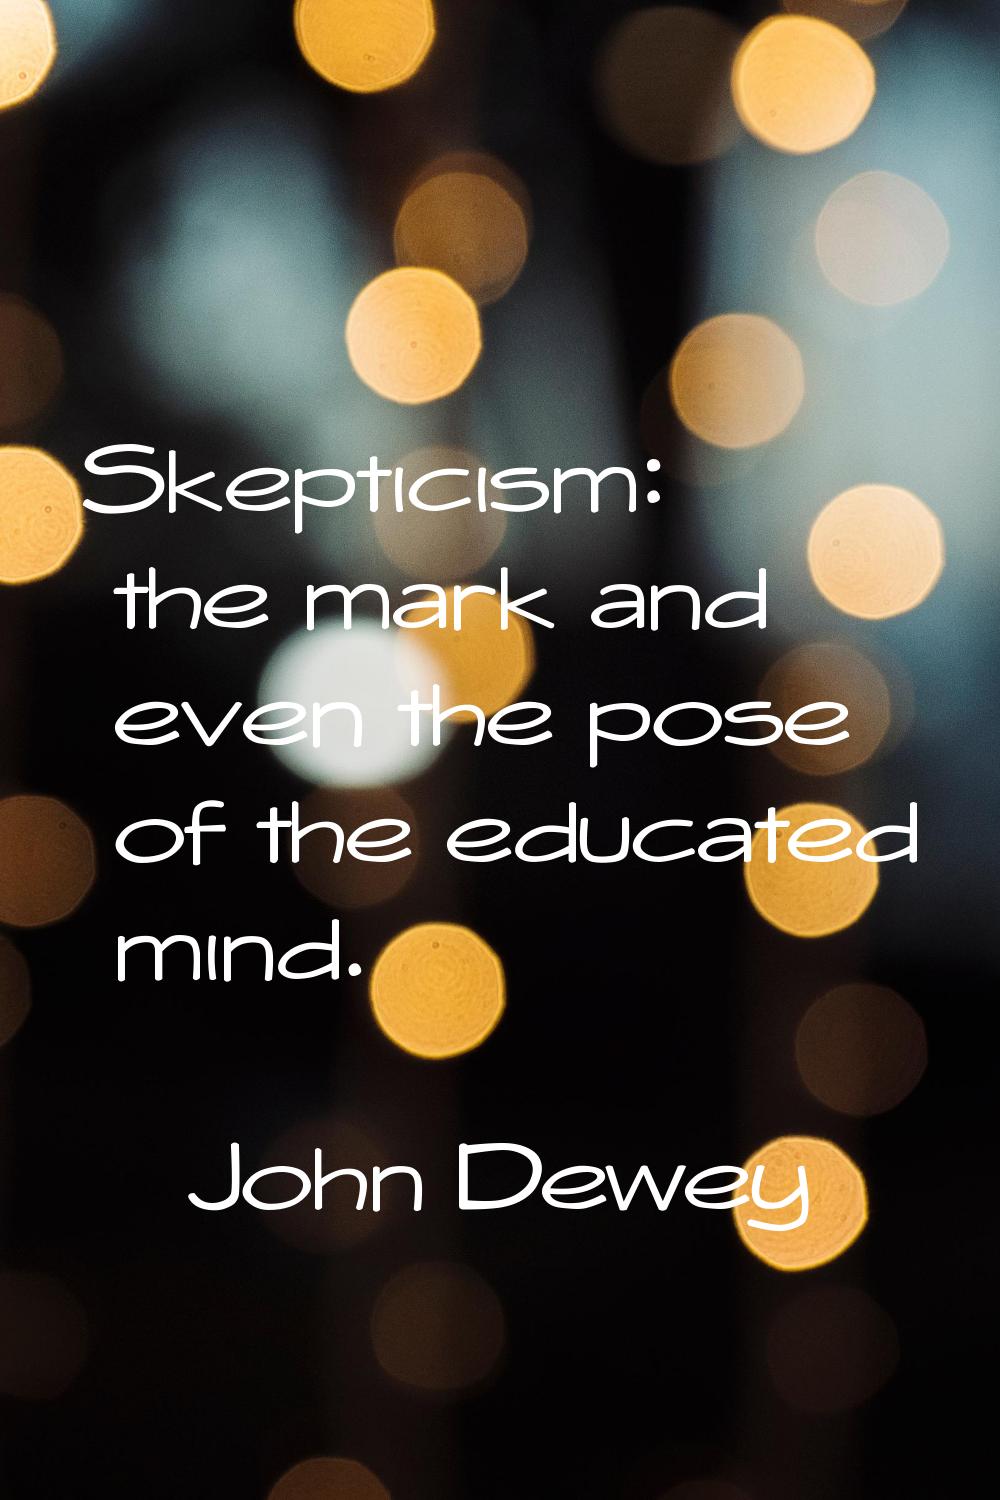 Skepticism: the mark and even the pose of the educated mind.